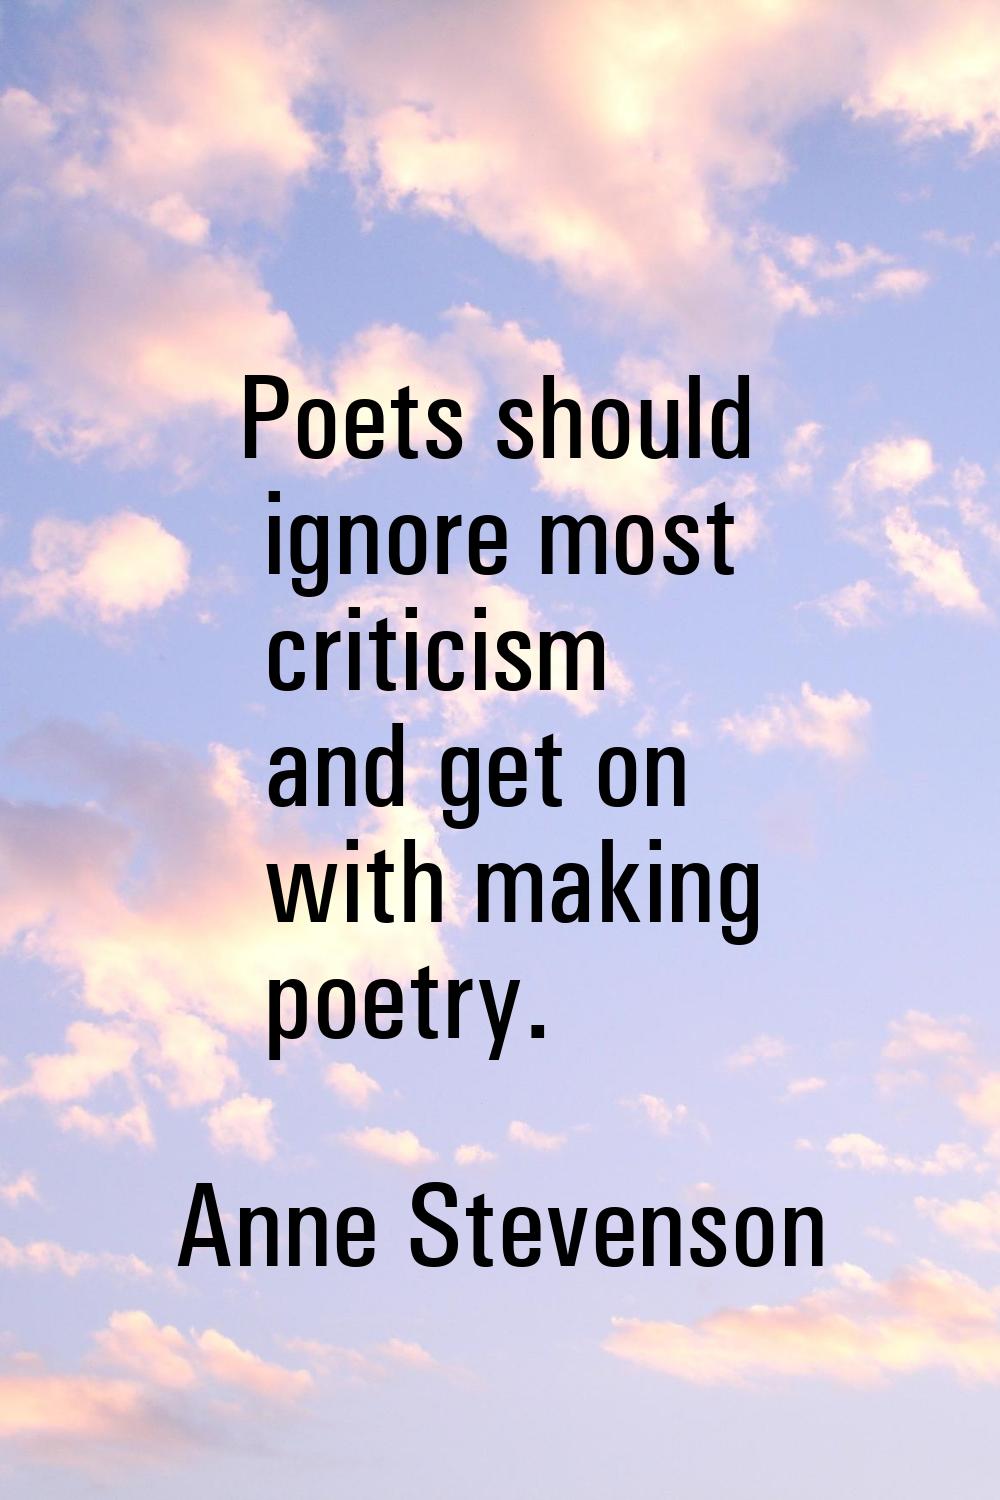 Poets should ignore most criticism and get on with making poetry.